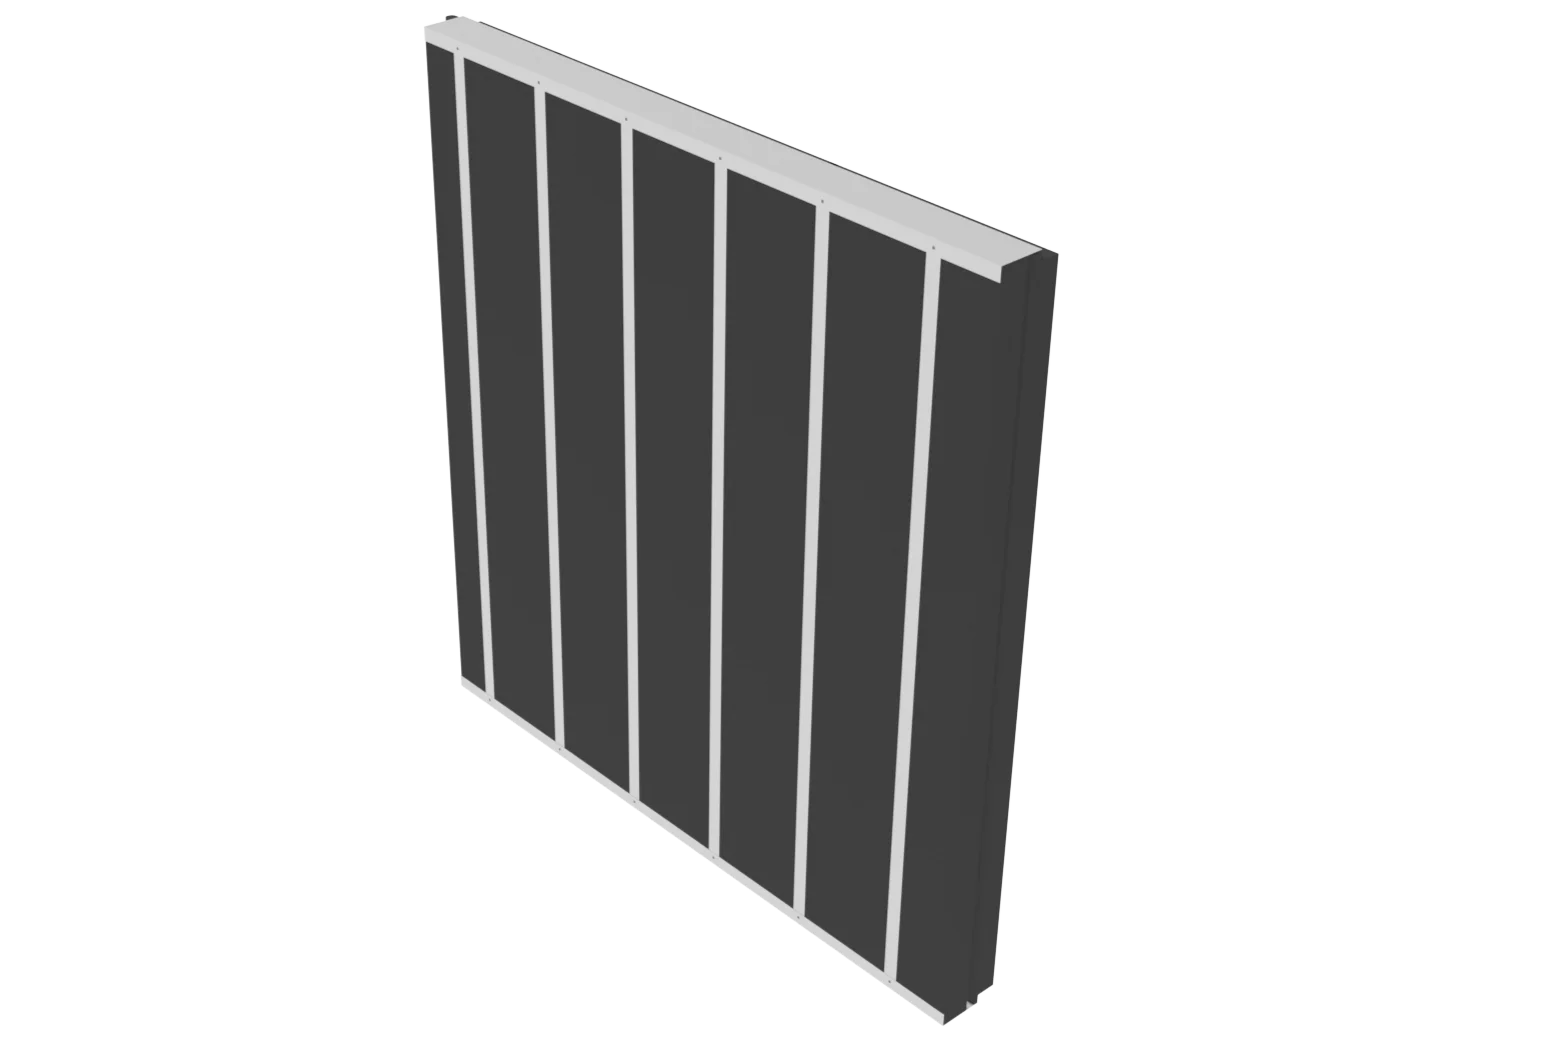 Isometric view of a wall system